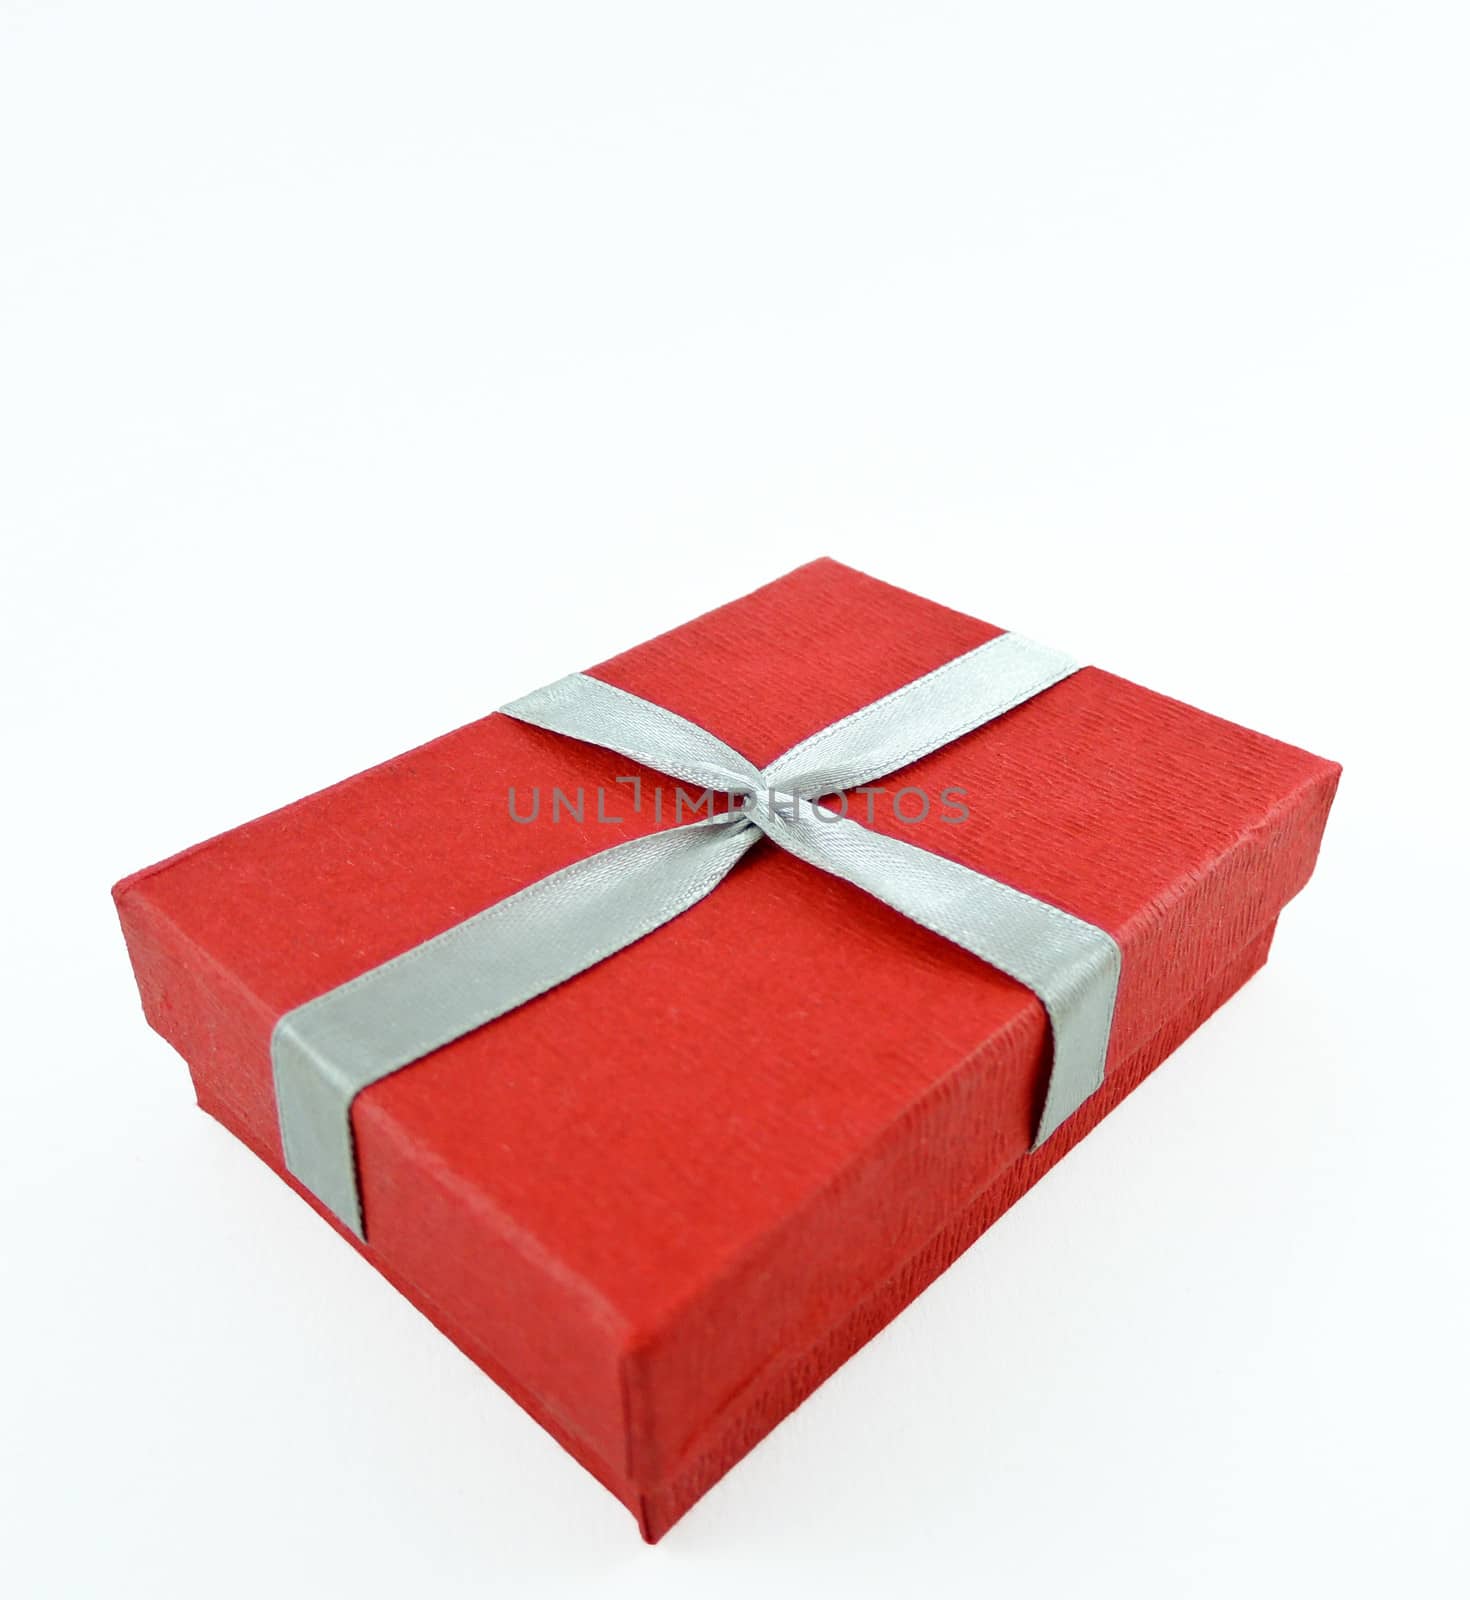 Red box and ribbon on white backgrounds

